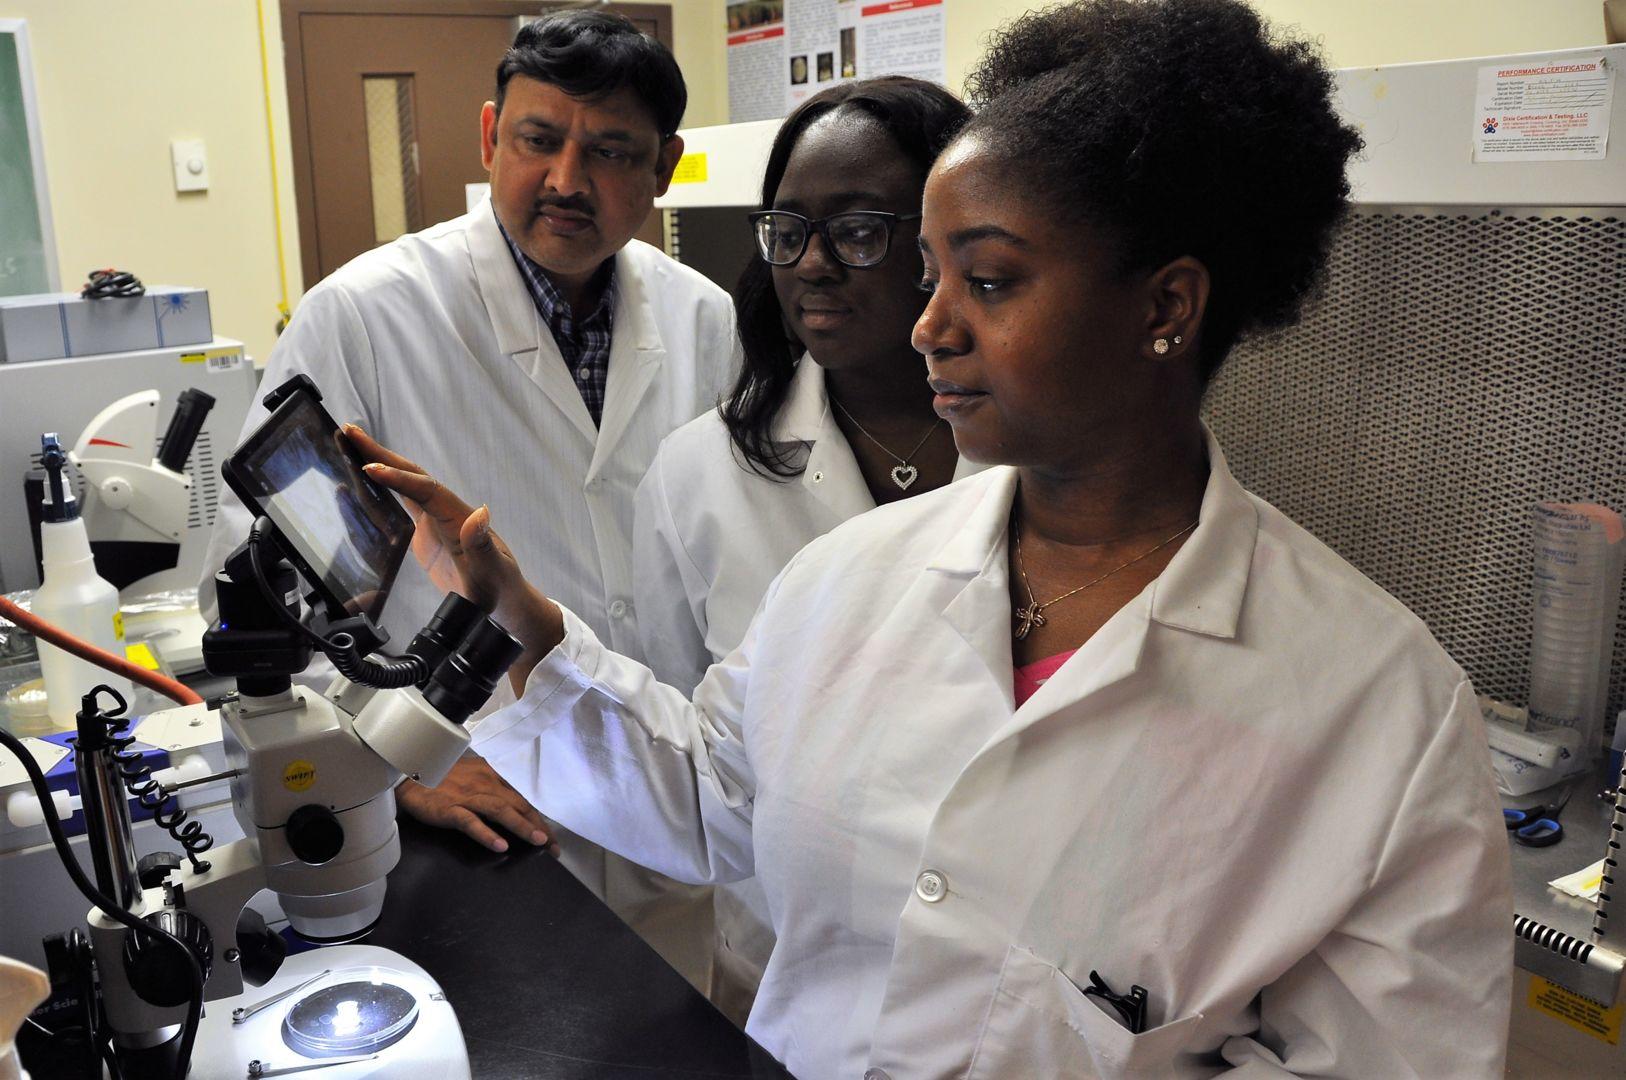 Fort Valley State University researcher Dr. Hari Singh (left) in the nanotechnology laboratory on campus with students Quaneisha Woodford (center) and Jamaura Williams (right).